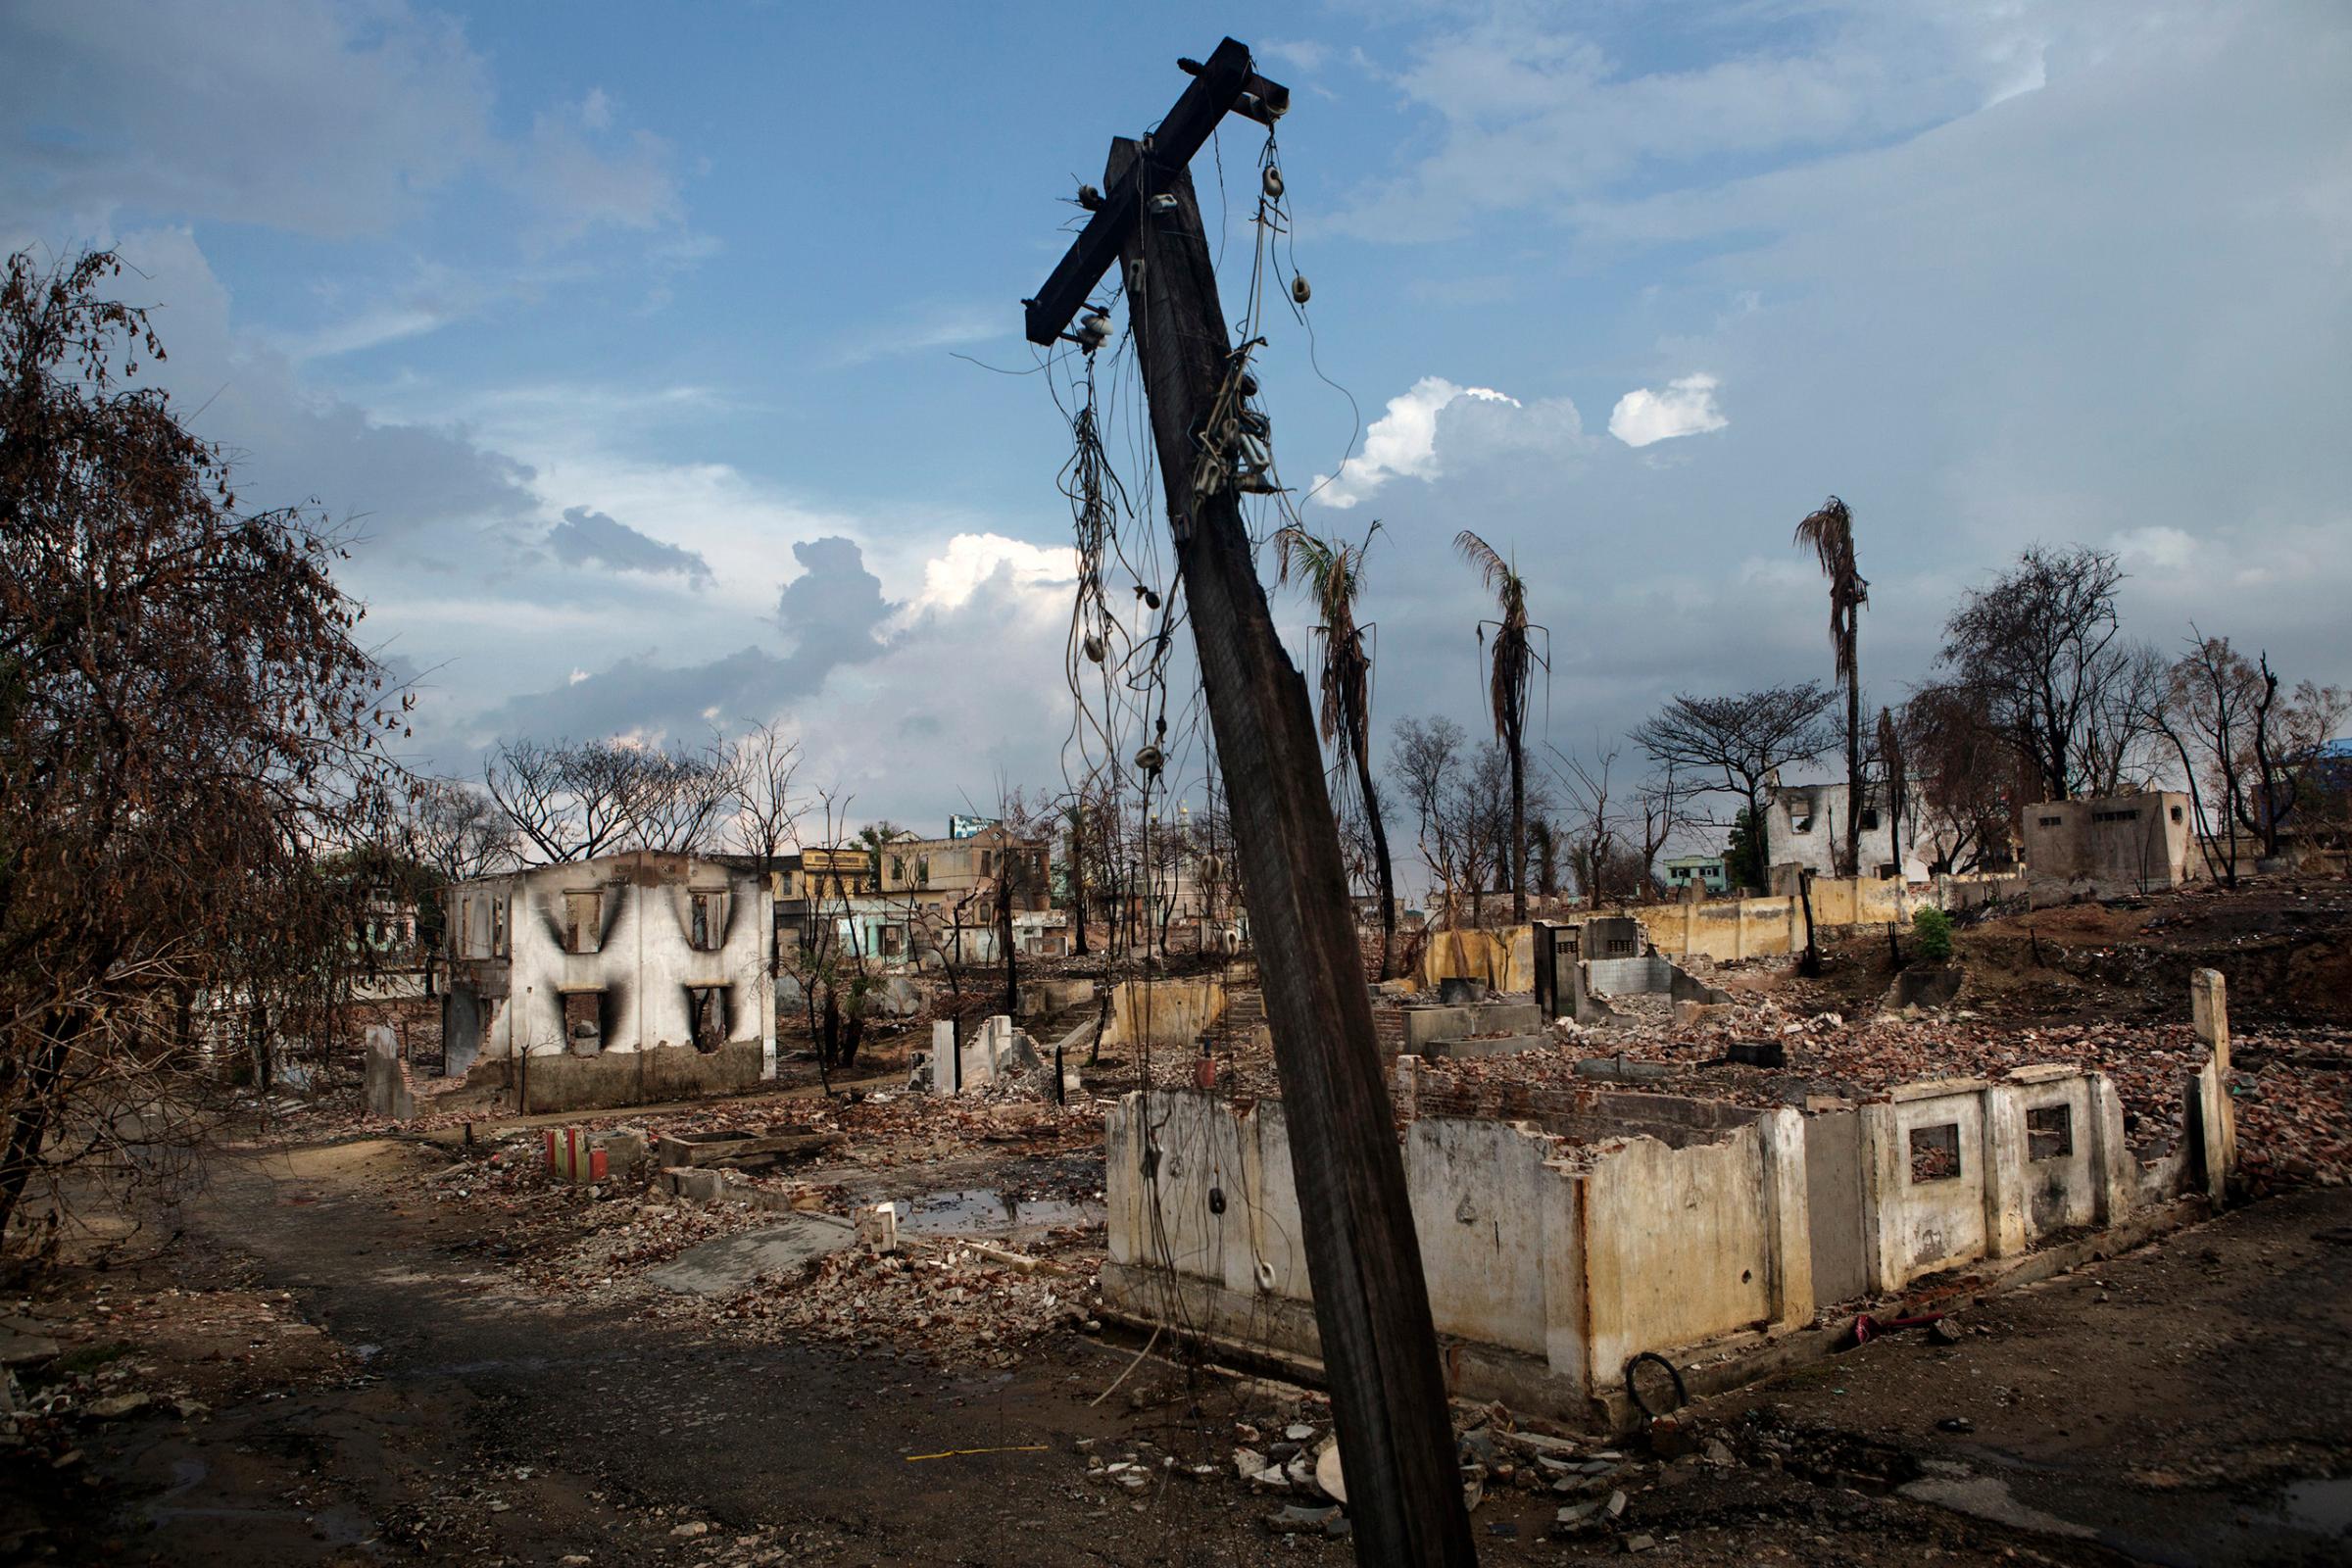 Evidence of ethnic strife as seen by burned trees and destroyed buildings in the Muslim quarter in Meikhtila, Burma, May 23, 2013.